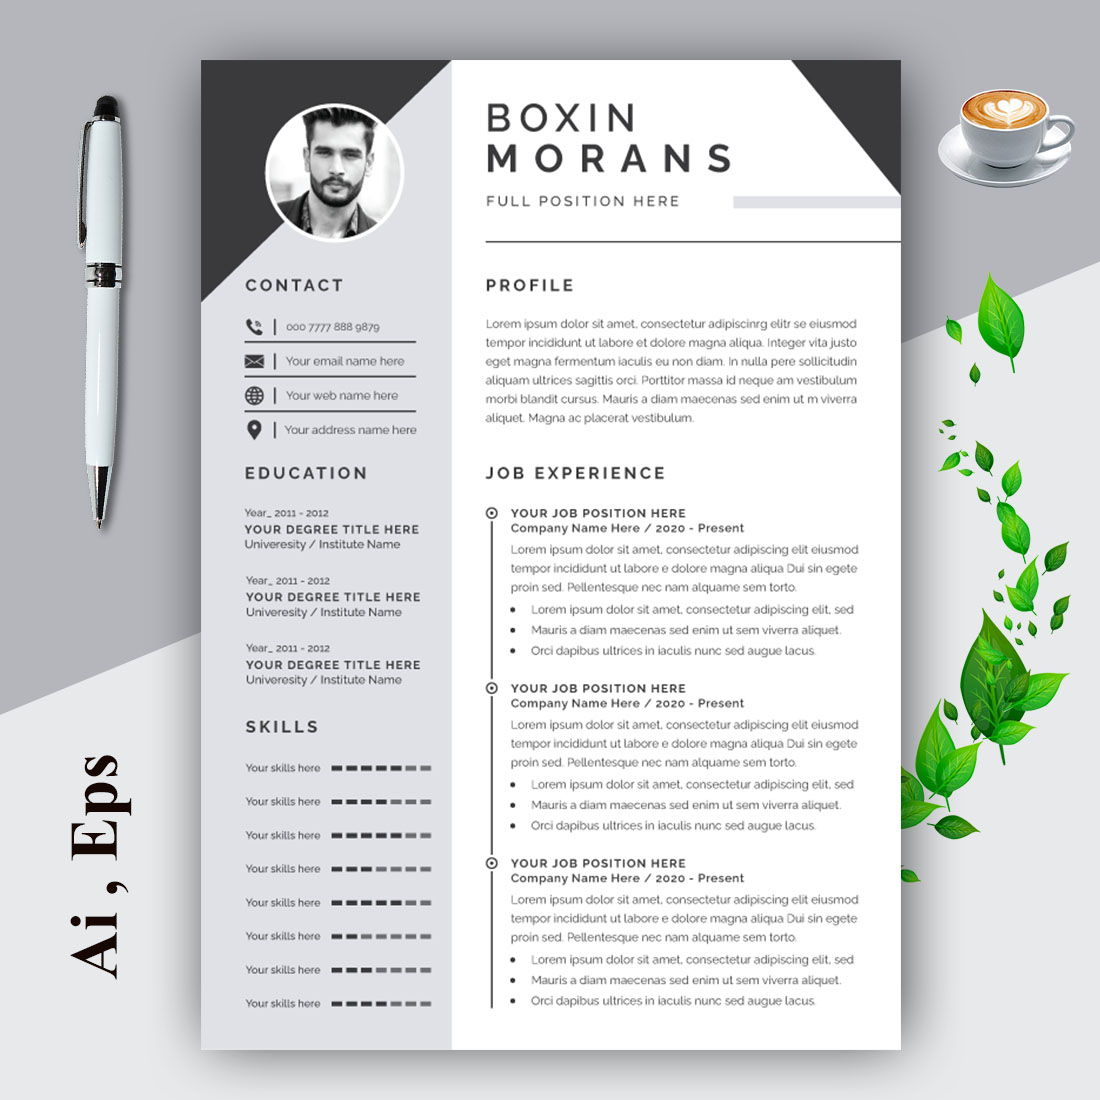 Business Cv Template Layout cover image.